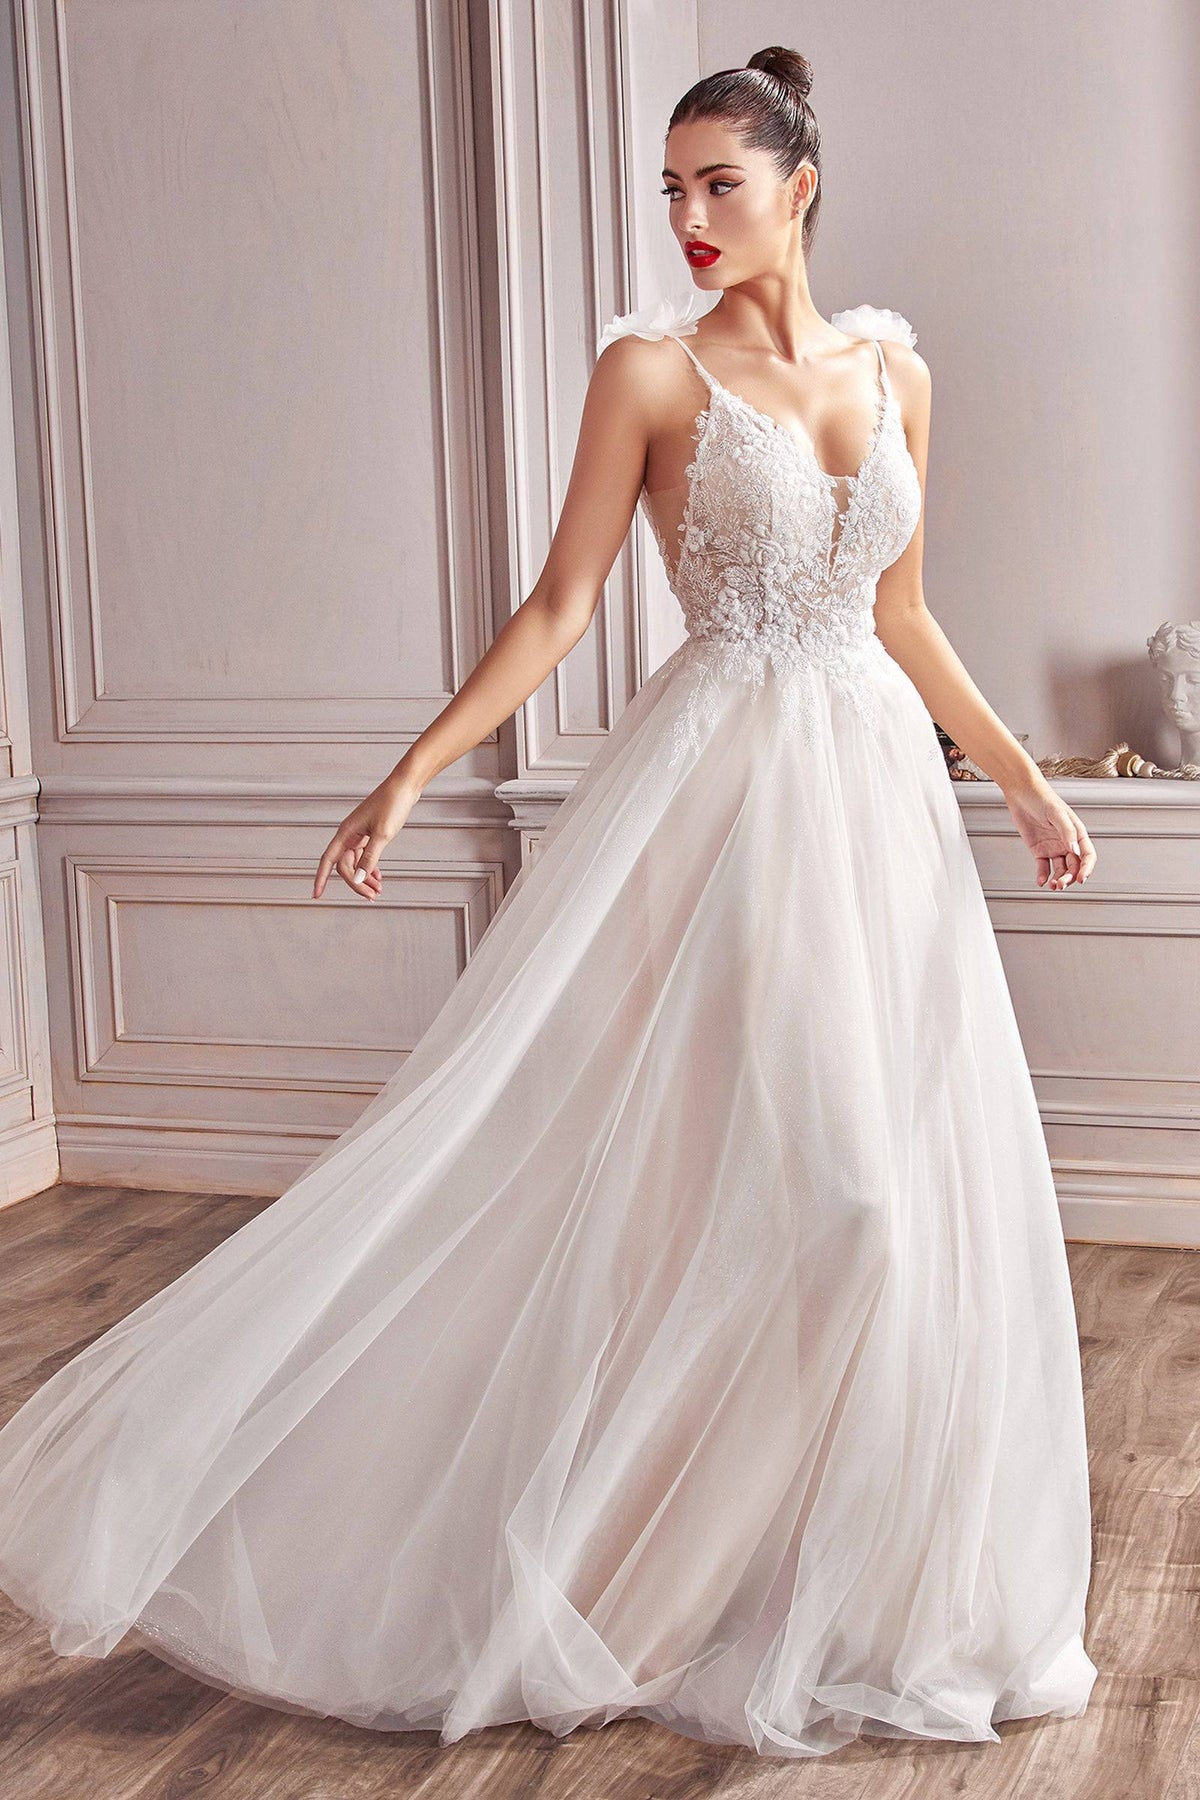 Elegant Floral Long Gown with Flower Accents on Sleeves and Embroidered Bodice #CDCD215W - NORMA REED